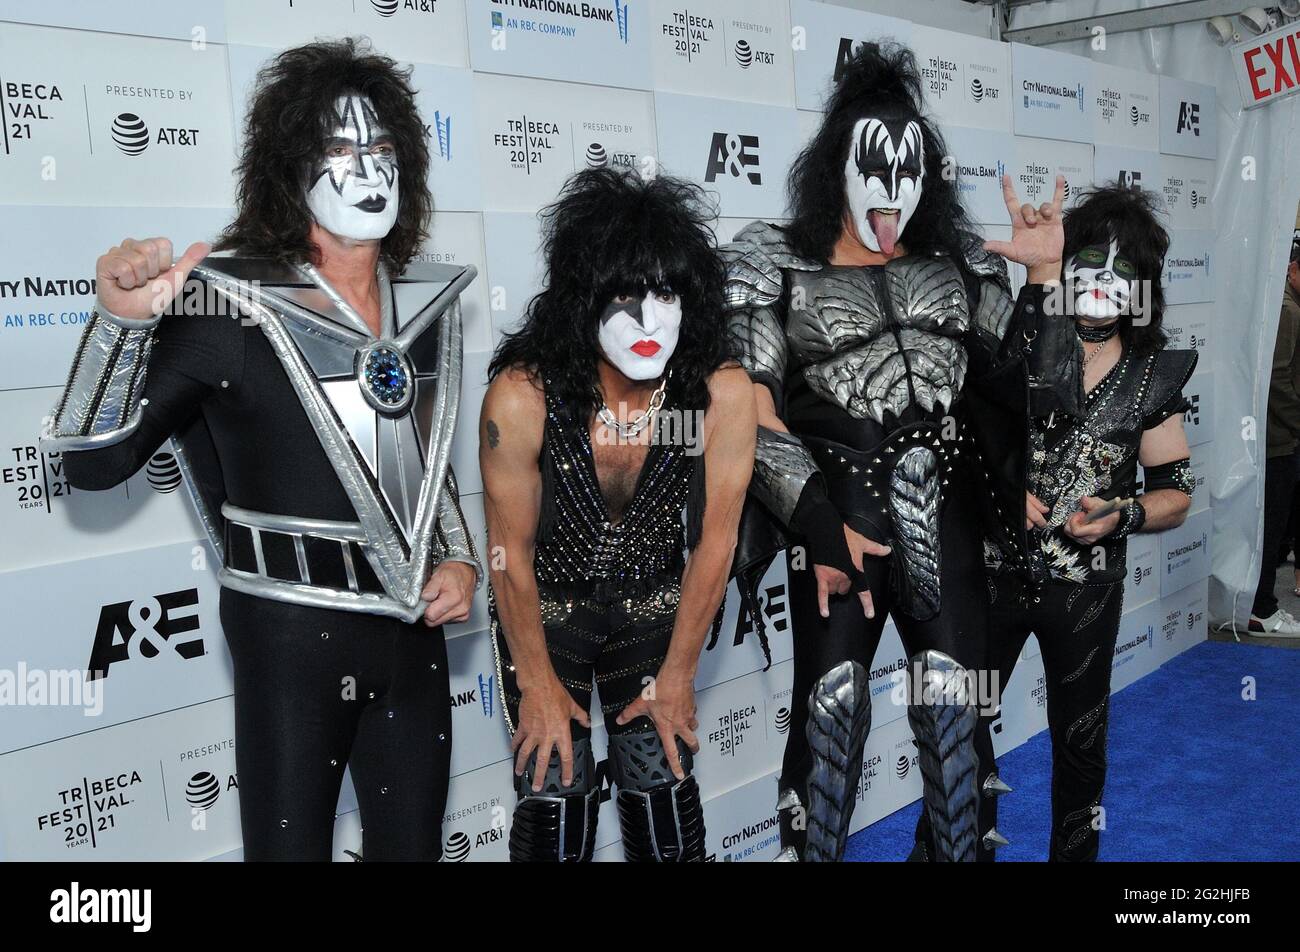 New York, USA. 11th June, 2021. L-R: KISS musicians Tommy Thayer, Paul  Stanley, Gene Simmons and Eric Singer attend the premiere of  Biography:KISStory at the Tribeca Festival 2021 at The Battery in